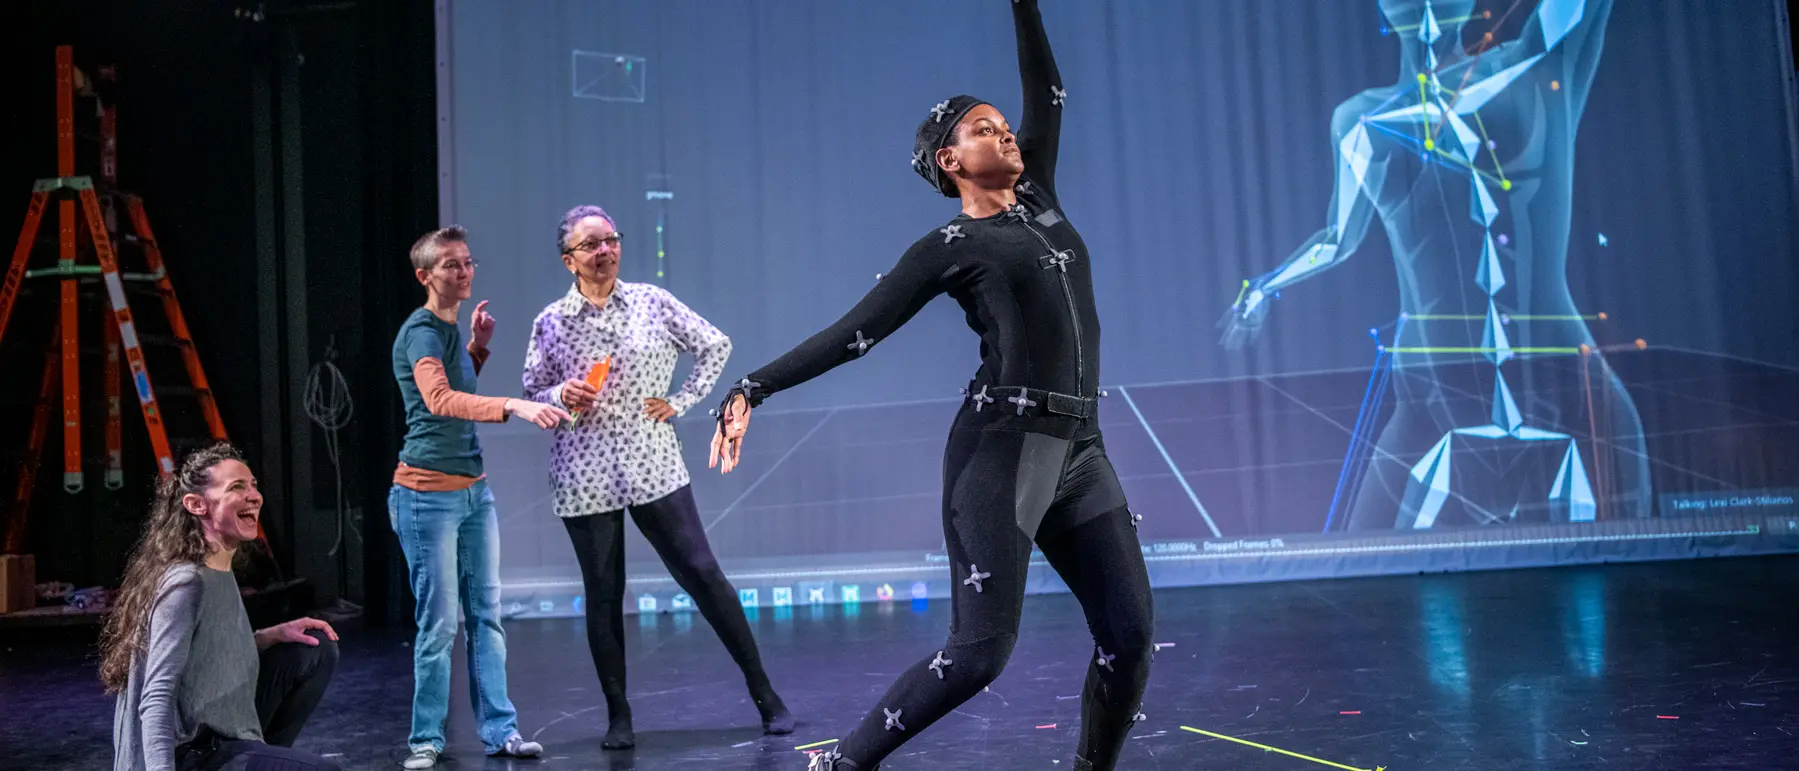 On a stage, a dancer in a black body suit and sensors steps forward and elegantly spreads her arms as three women behind her watch excitedly. A computer-generated geometrical illustration of the dancer highlights where her bones are as she moves.